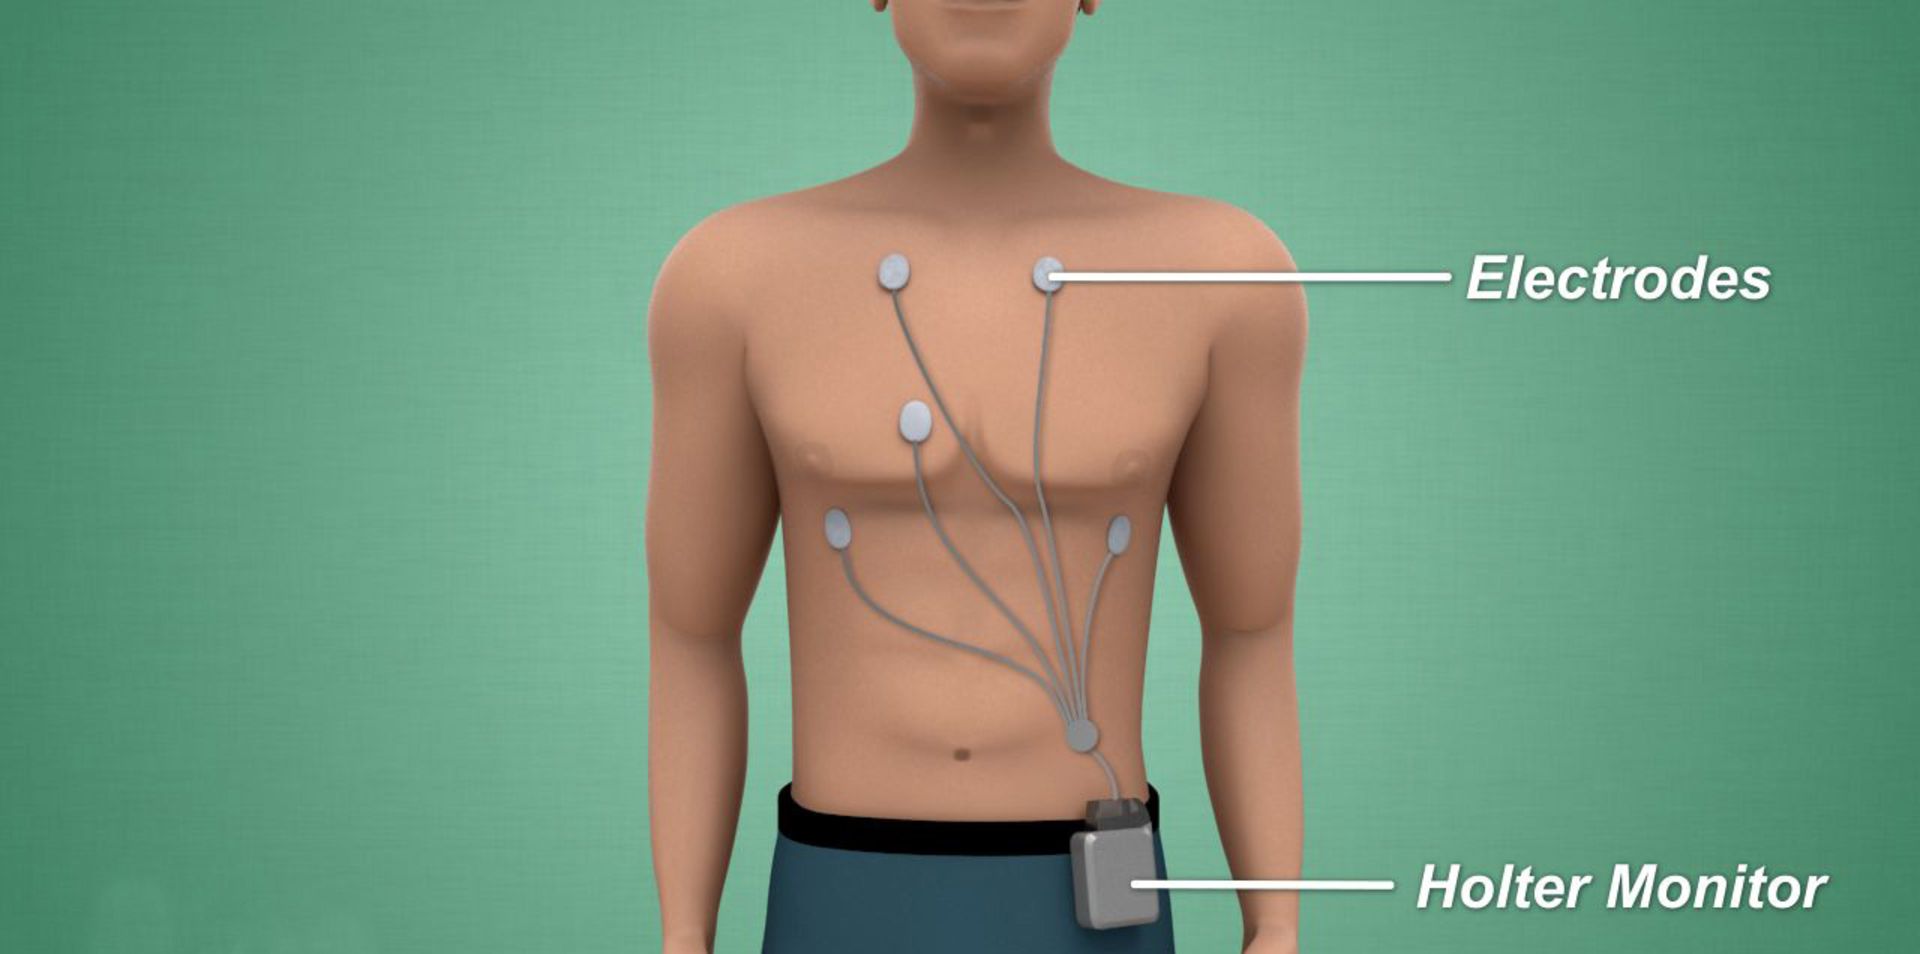 Holter monitoring